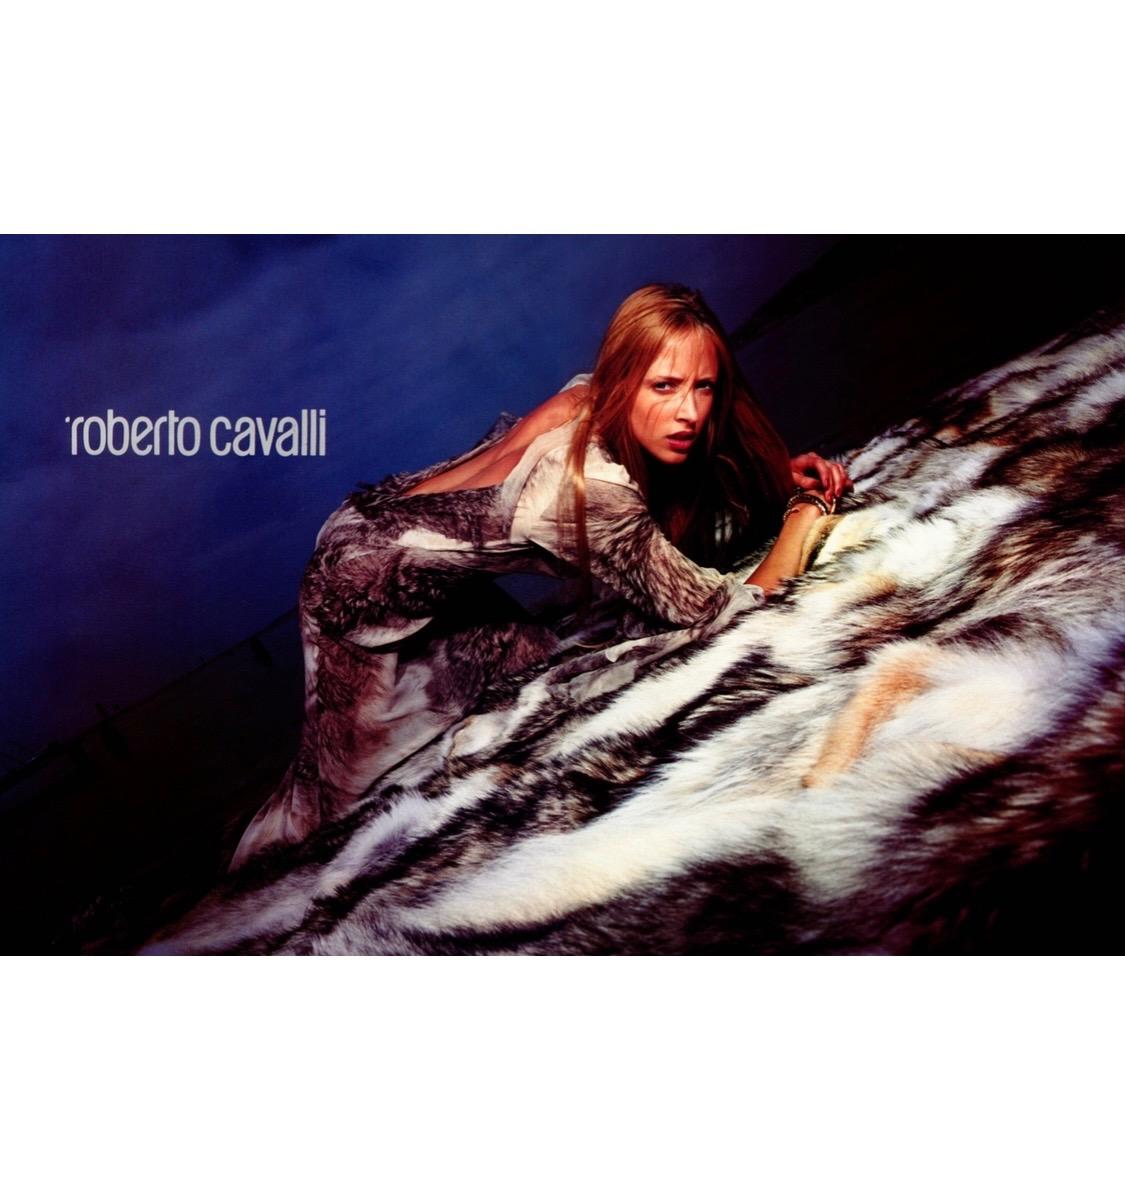 Presenting a grey cow print Roberto Cavalli dress. From the Fall/Winter 1999 collection, a similar dress with the same print was highlighted in the season's ad campaign. This fabulous dress is constructed entirely of a grey and black natural cow